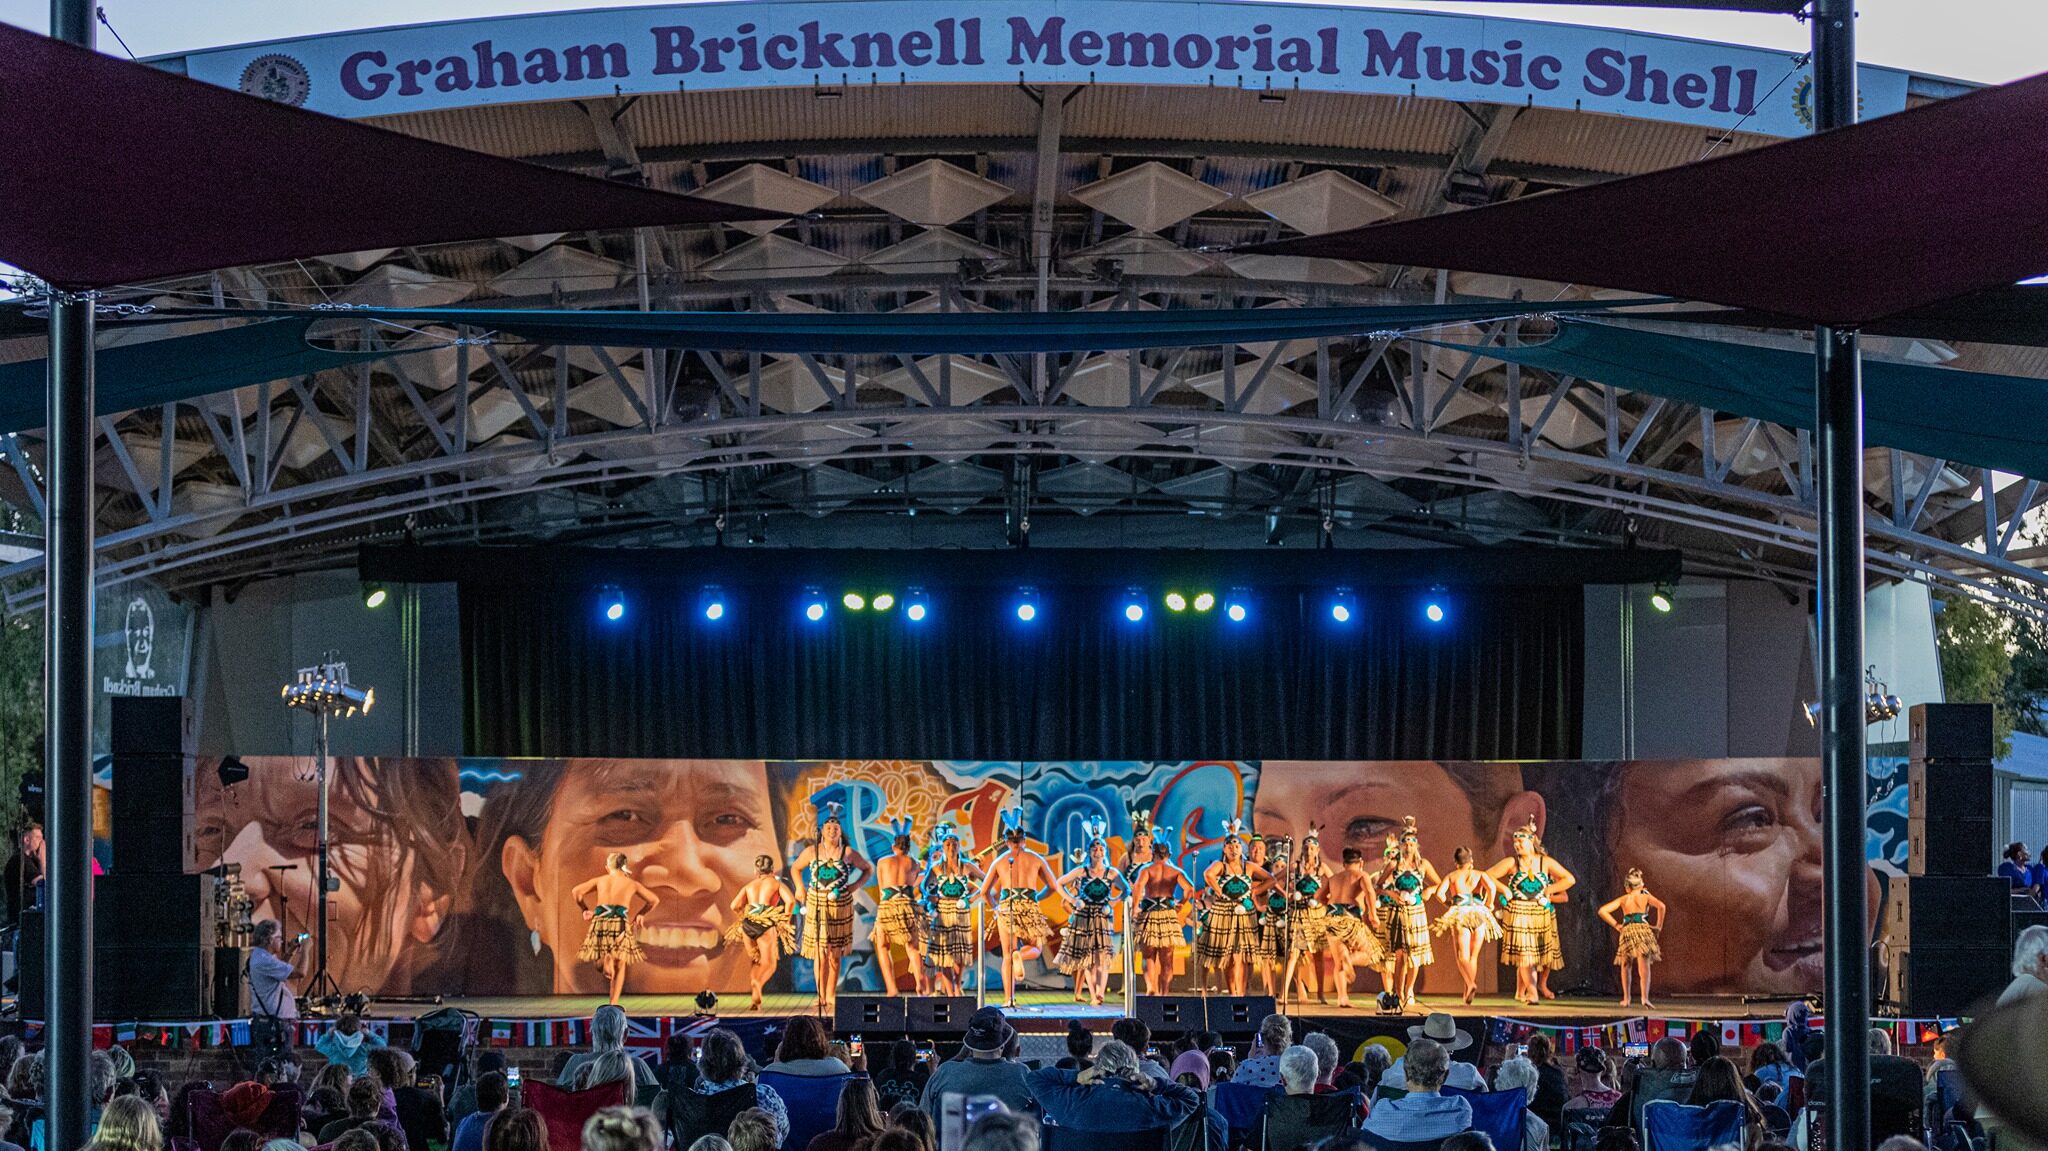 Looking across a seated crowd towards the Graham Bricknell Memorial Music Shell. Multicultural dancers are on the stage performing. The backdrop is a mural with the word 'belong' and the faces of four local women from Bunbury's multicultural community. It's later in the afternoon and the stage is lit up in lights.